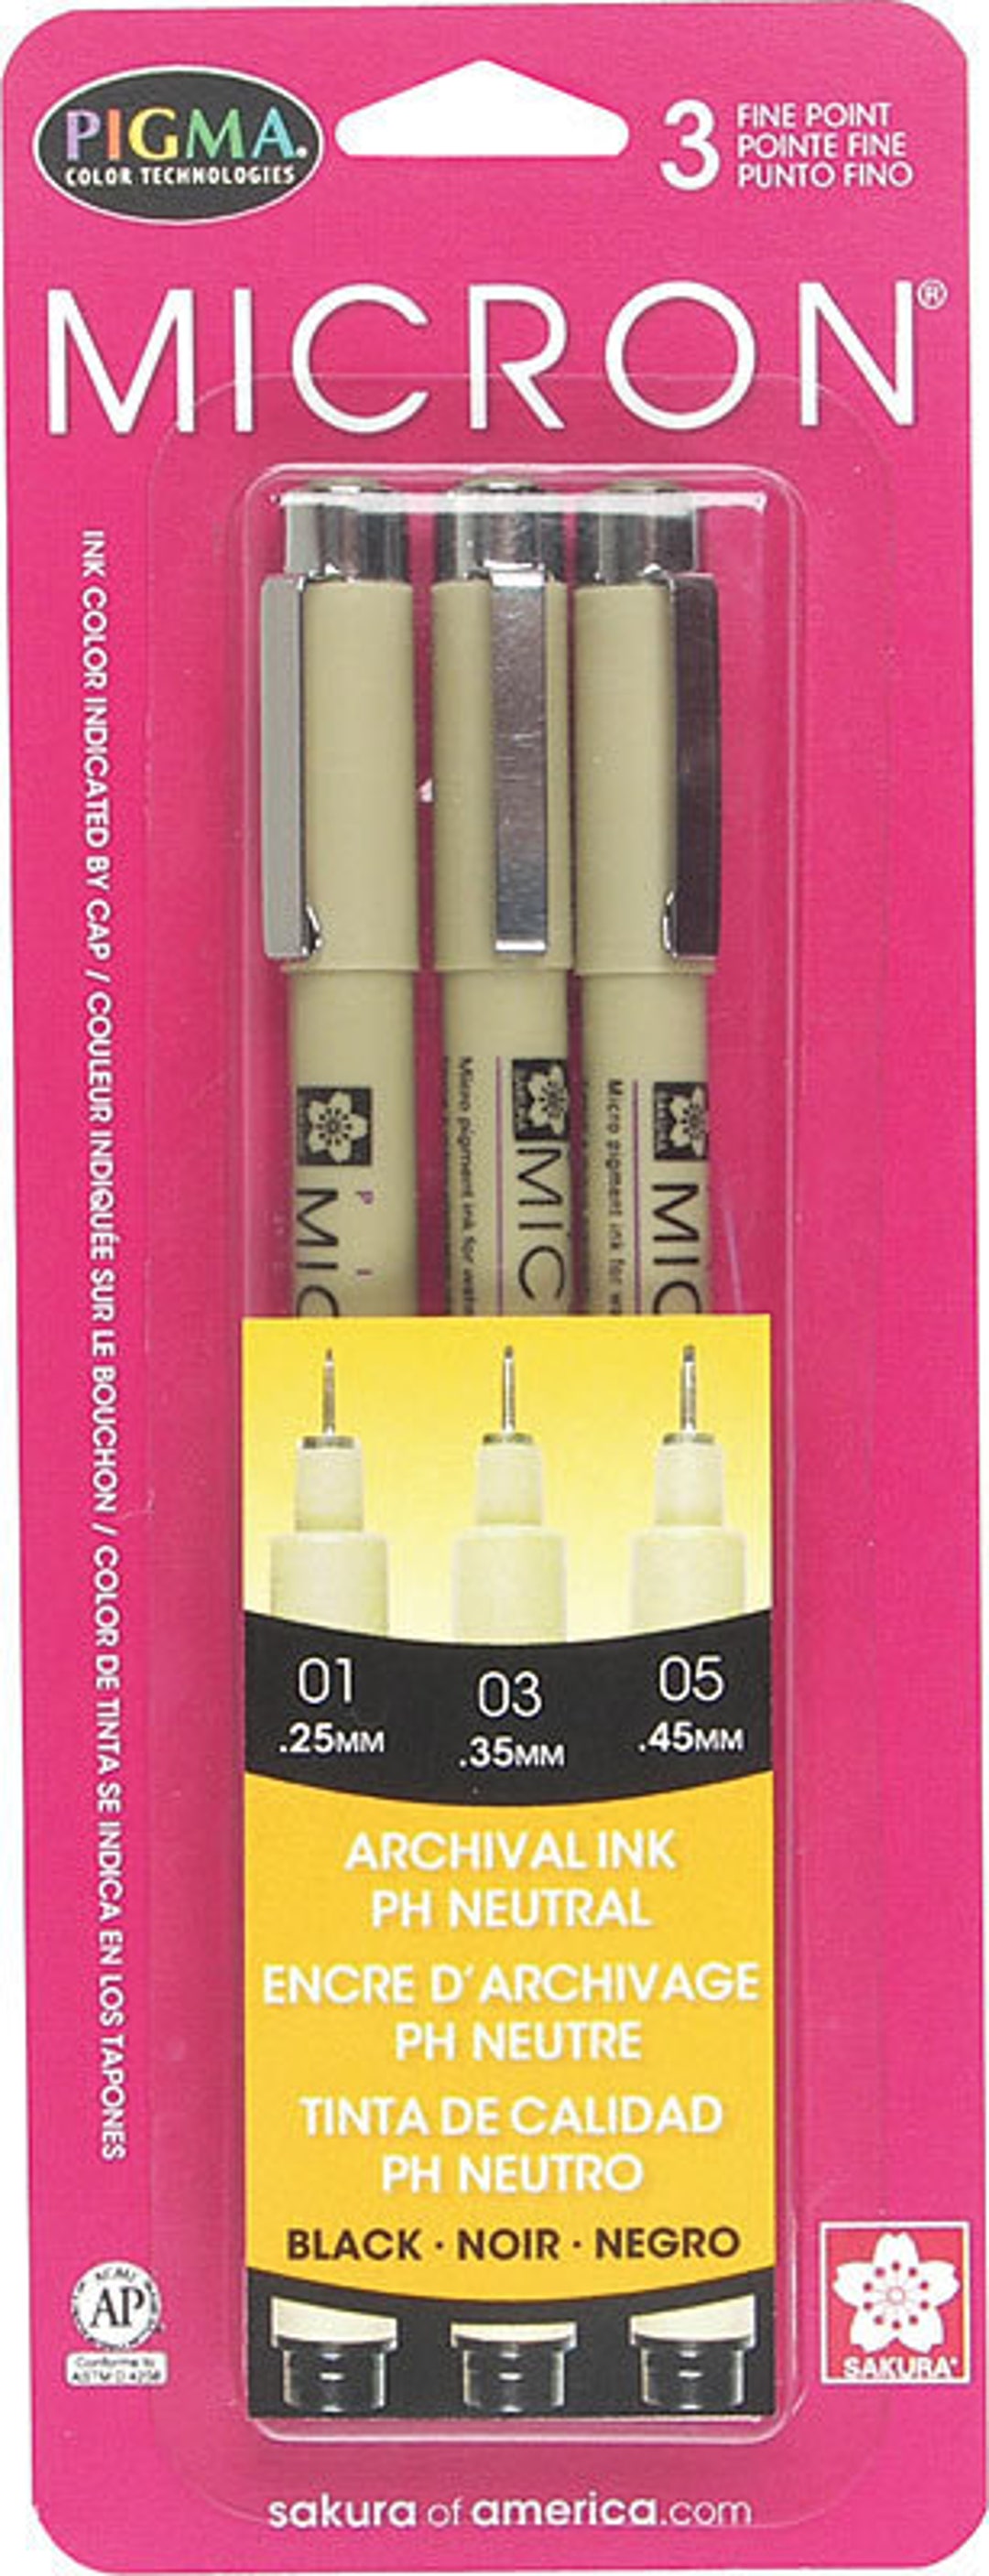 Pigma Micron Pen Cube Set of 16 Assorted Colors - Size 05 (.45mm